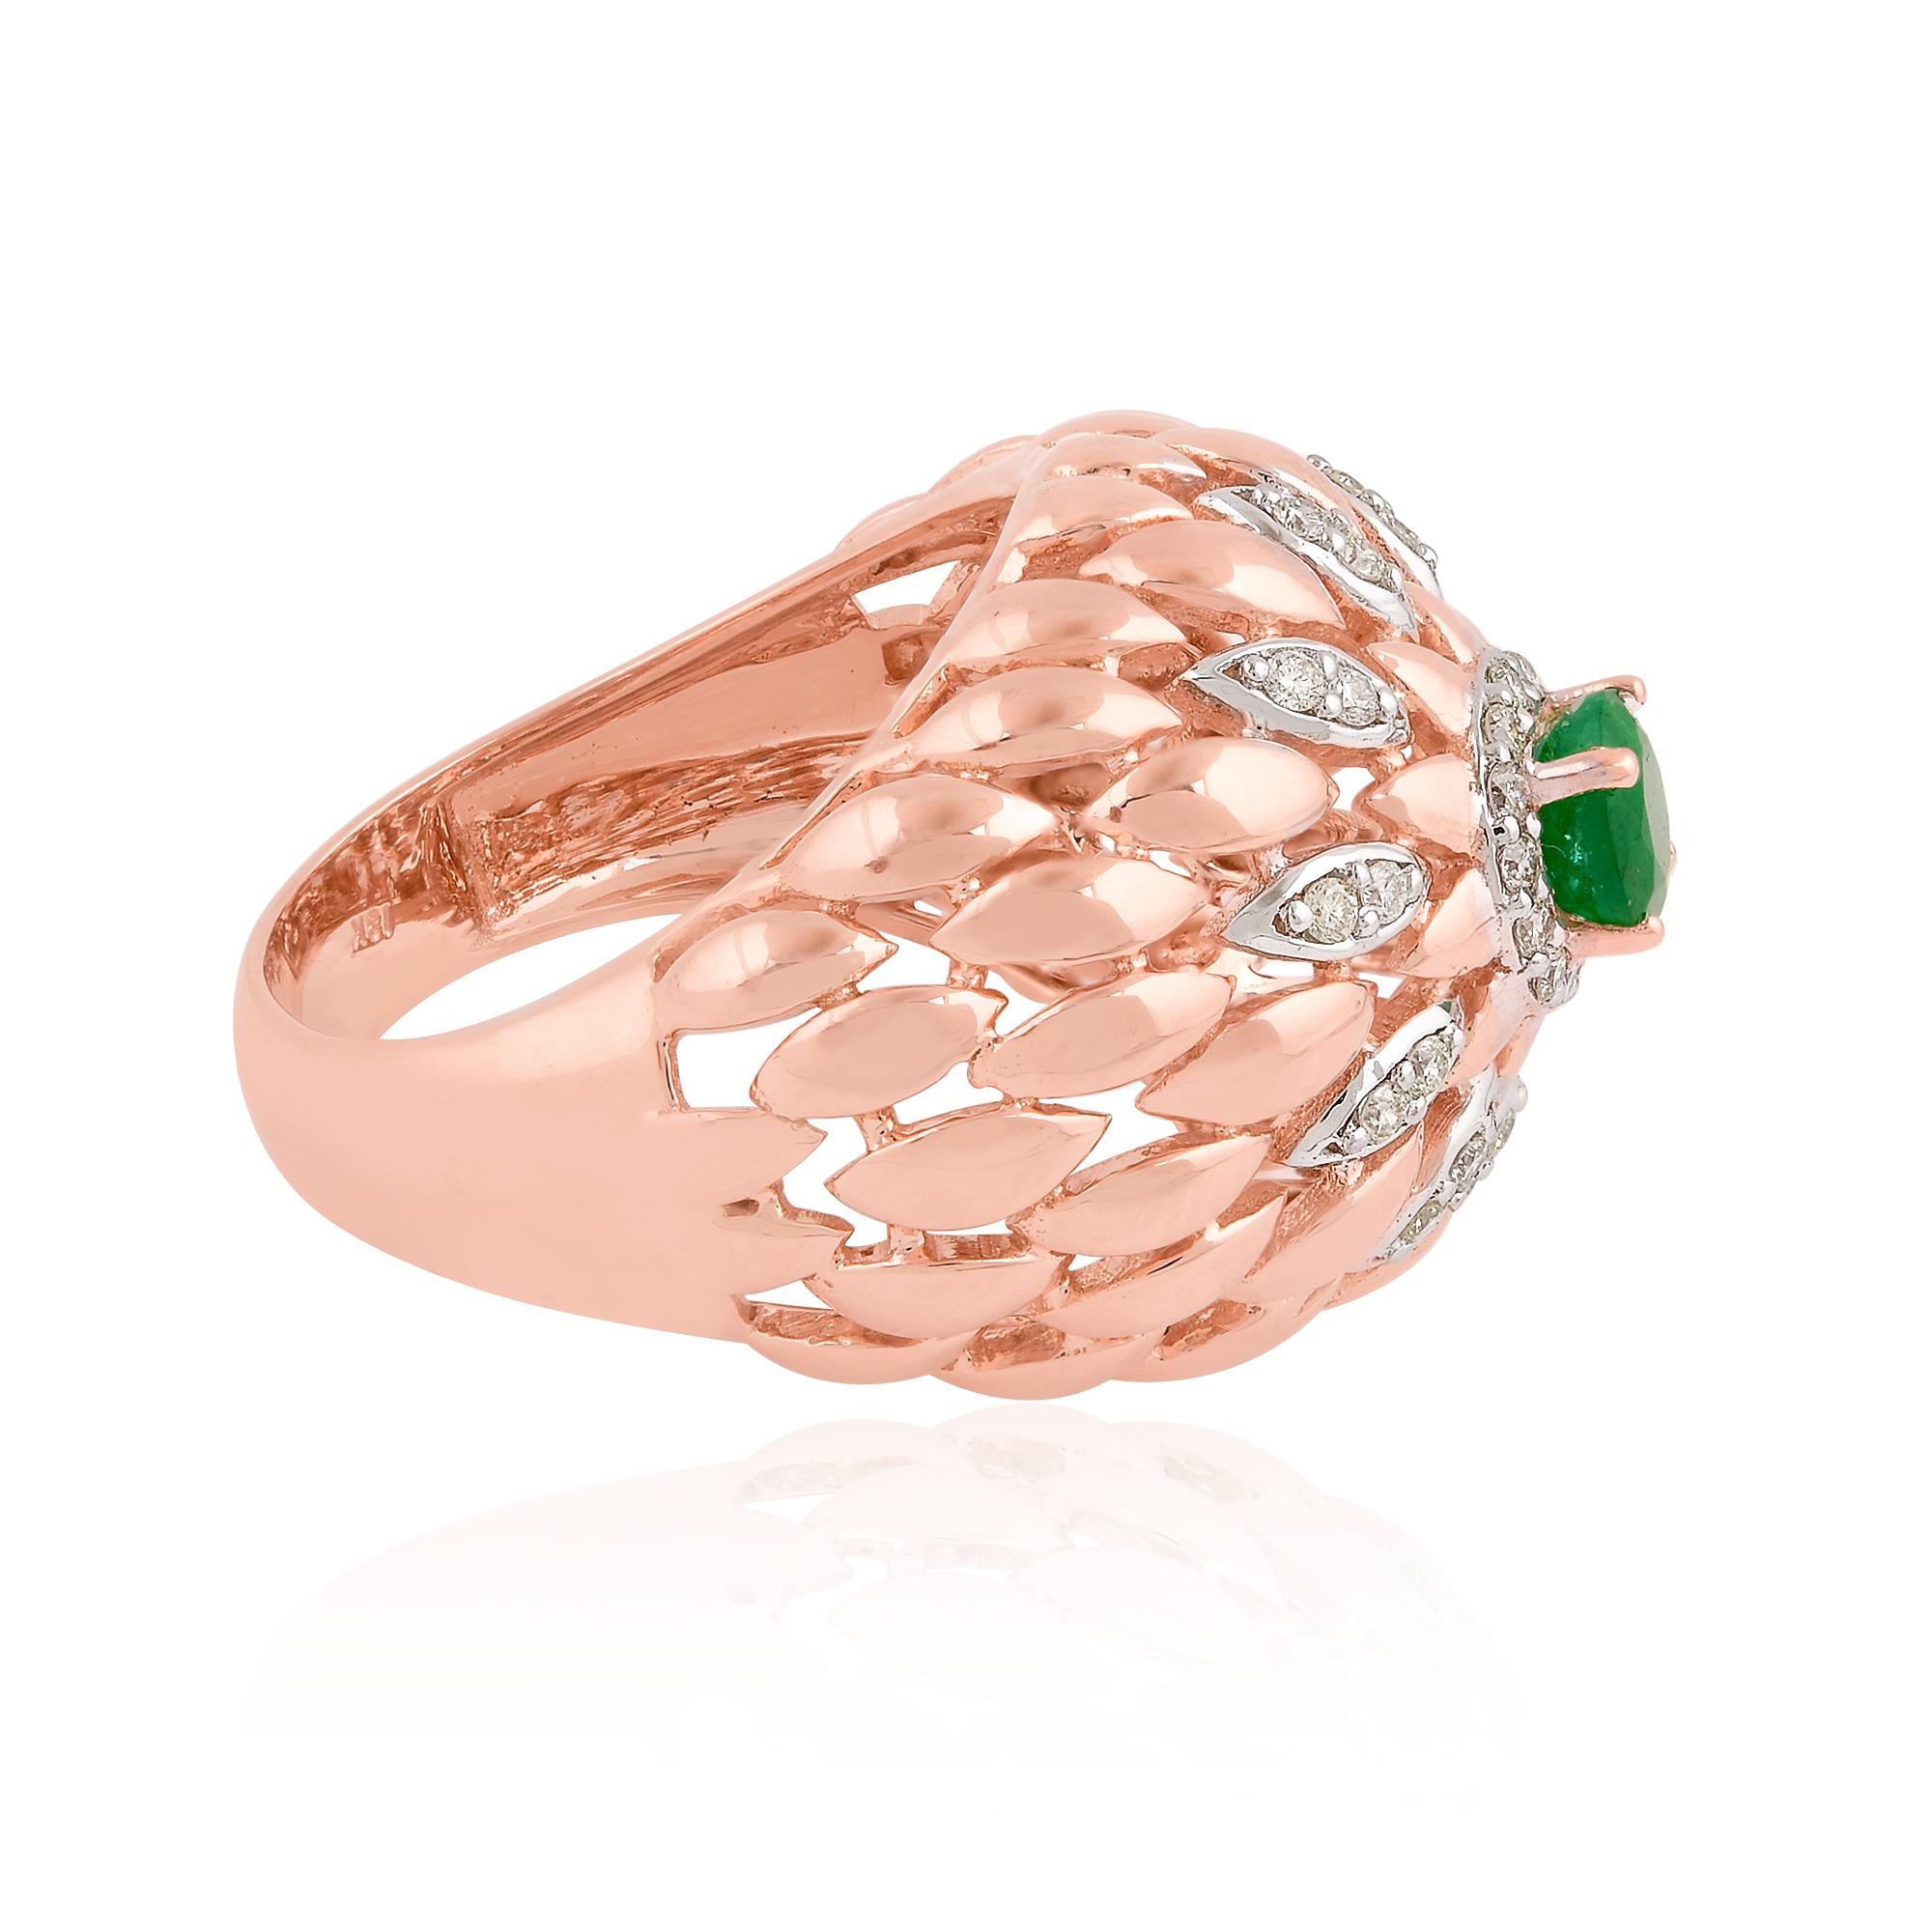 For Sale:  Natural Emerald Gemstone Dome Ring Diamond Pave Solid 18k Rose Gold Fine Jewelry 3